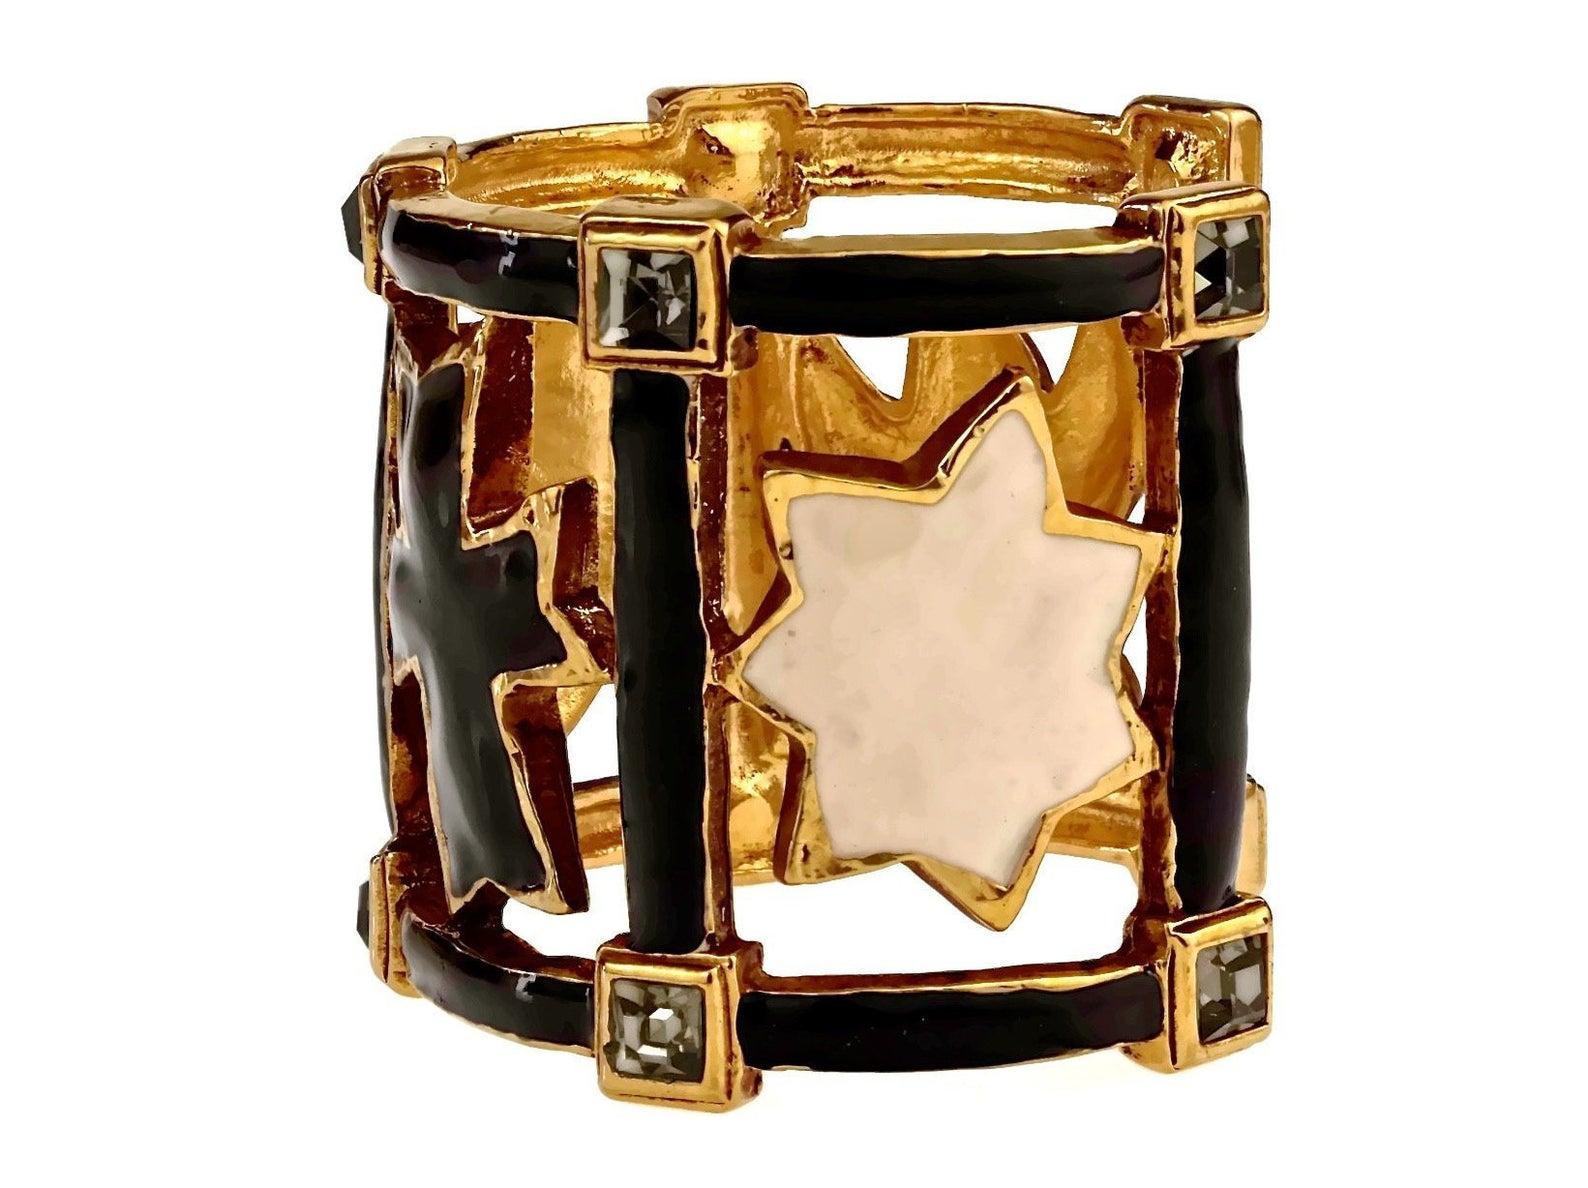 Vintage Iconic CHRISTIAN LACROIX Enamel Emblem Rhinestone Cuff Bracelet

Measurements:
Height: 2.28 inches (5.8 cm)
Inner Circumference: 6.57 inches (16.7 cm)

Features:
- 100% Authentic CHRISTIAN LACROIX.
- Black and white enamel cuff with iconic